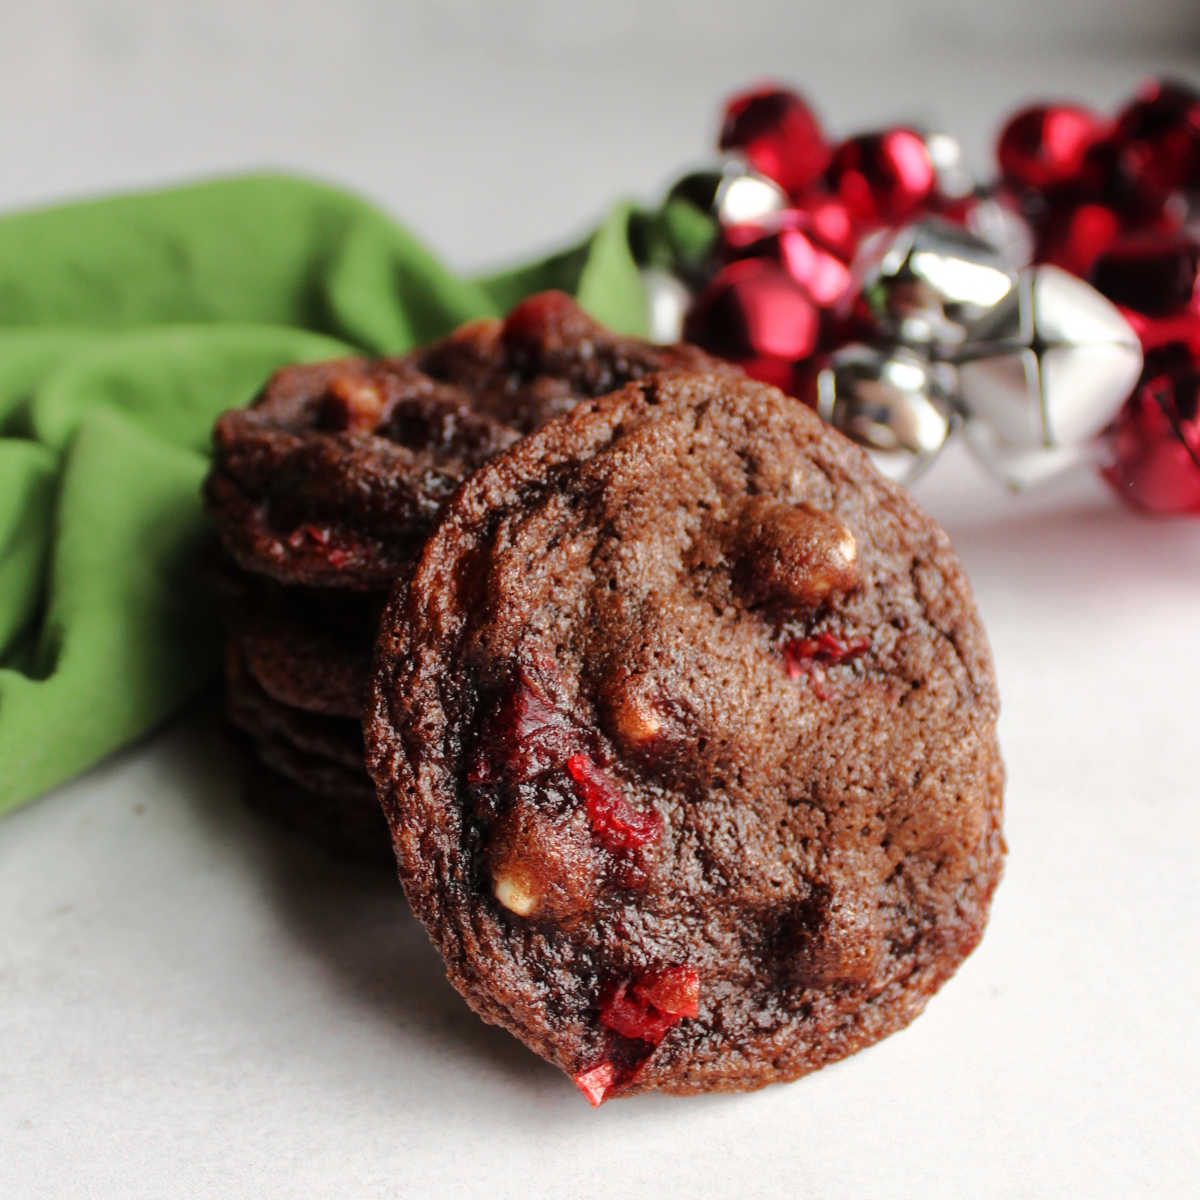 Chocolate cookie with white chips and bits of maraschino cherry baked inside.